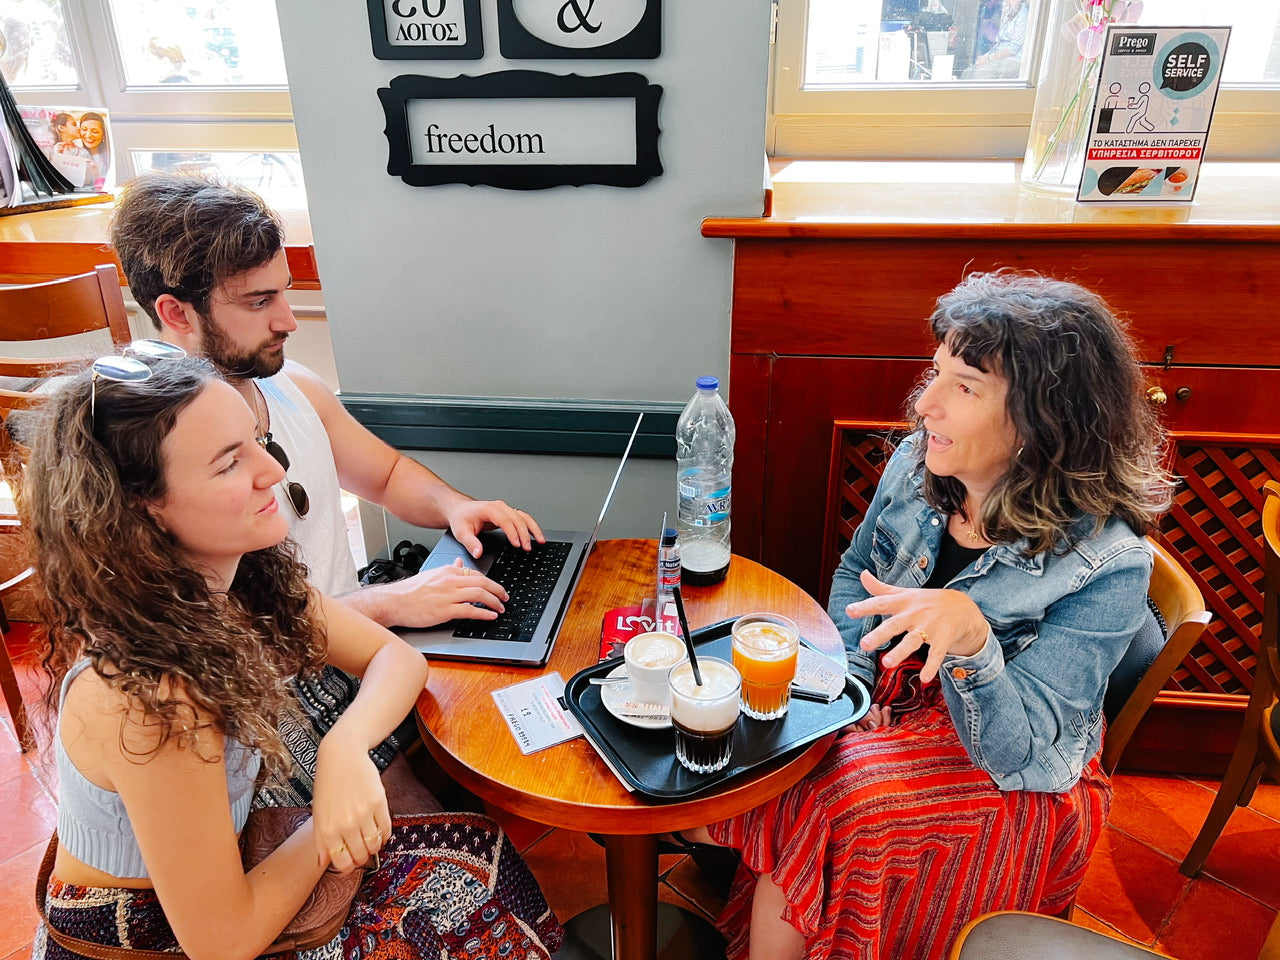 Elli Milan, Dimitra Milan and Jake Dunn discuss The Outstanding Artist at a cafe in Nafplio, Greece